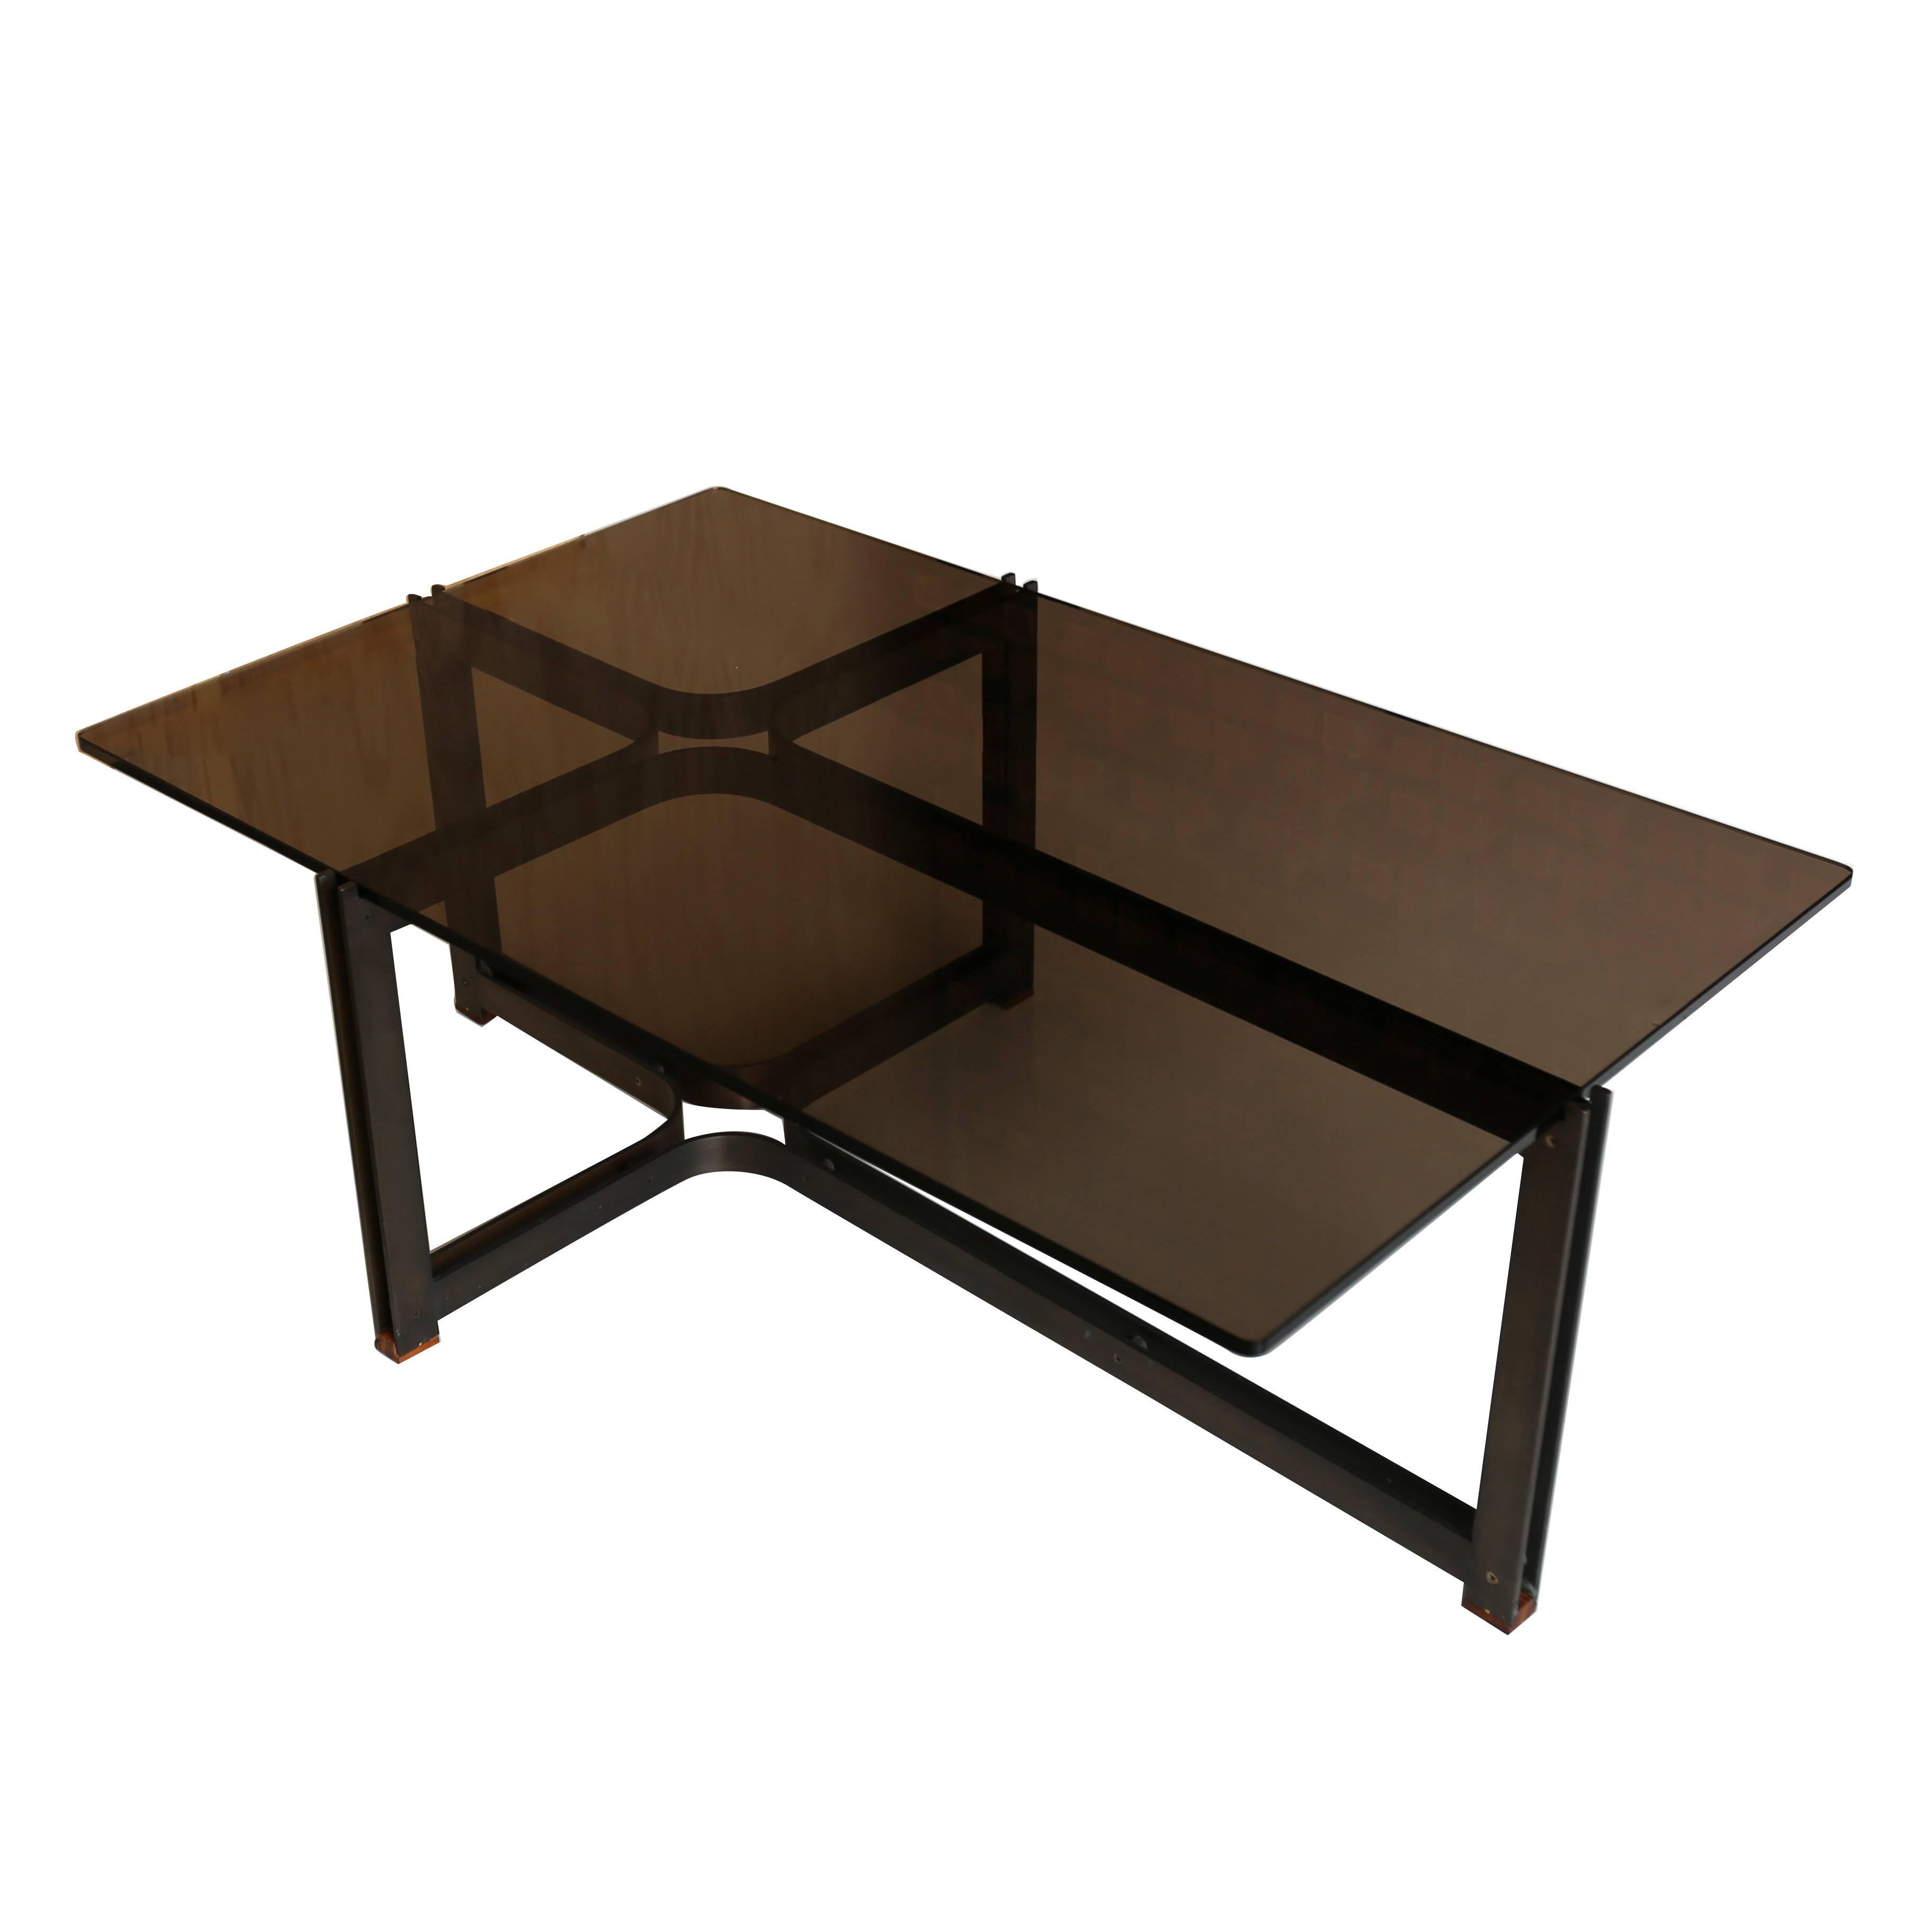 Bronze, Rosewood and Smoked Glass Coffee Table by Tom Lopinski For Dunbar